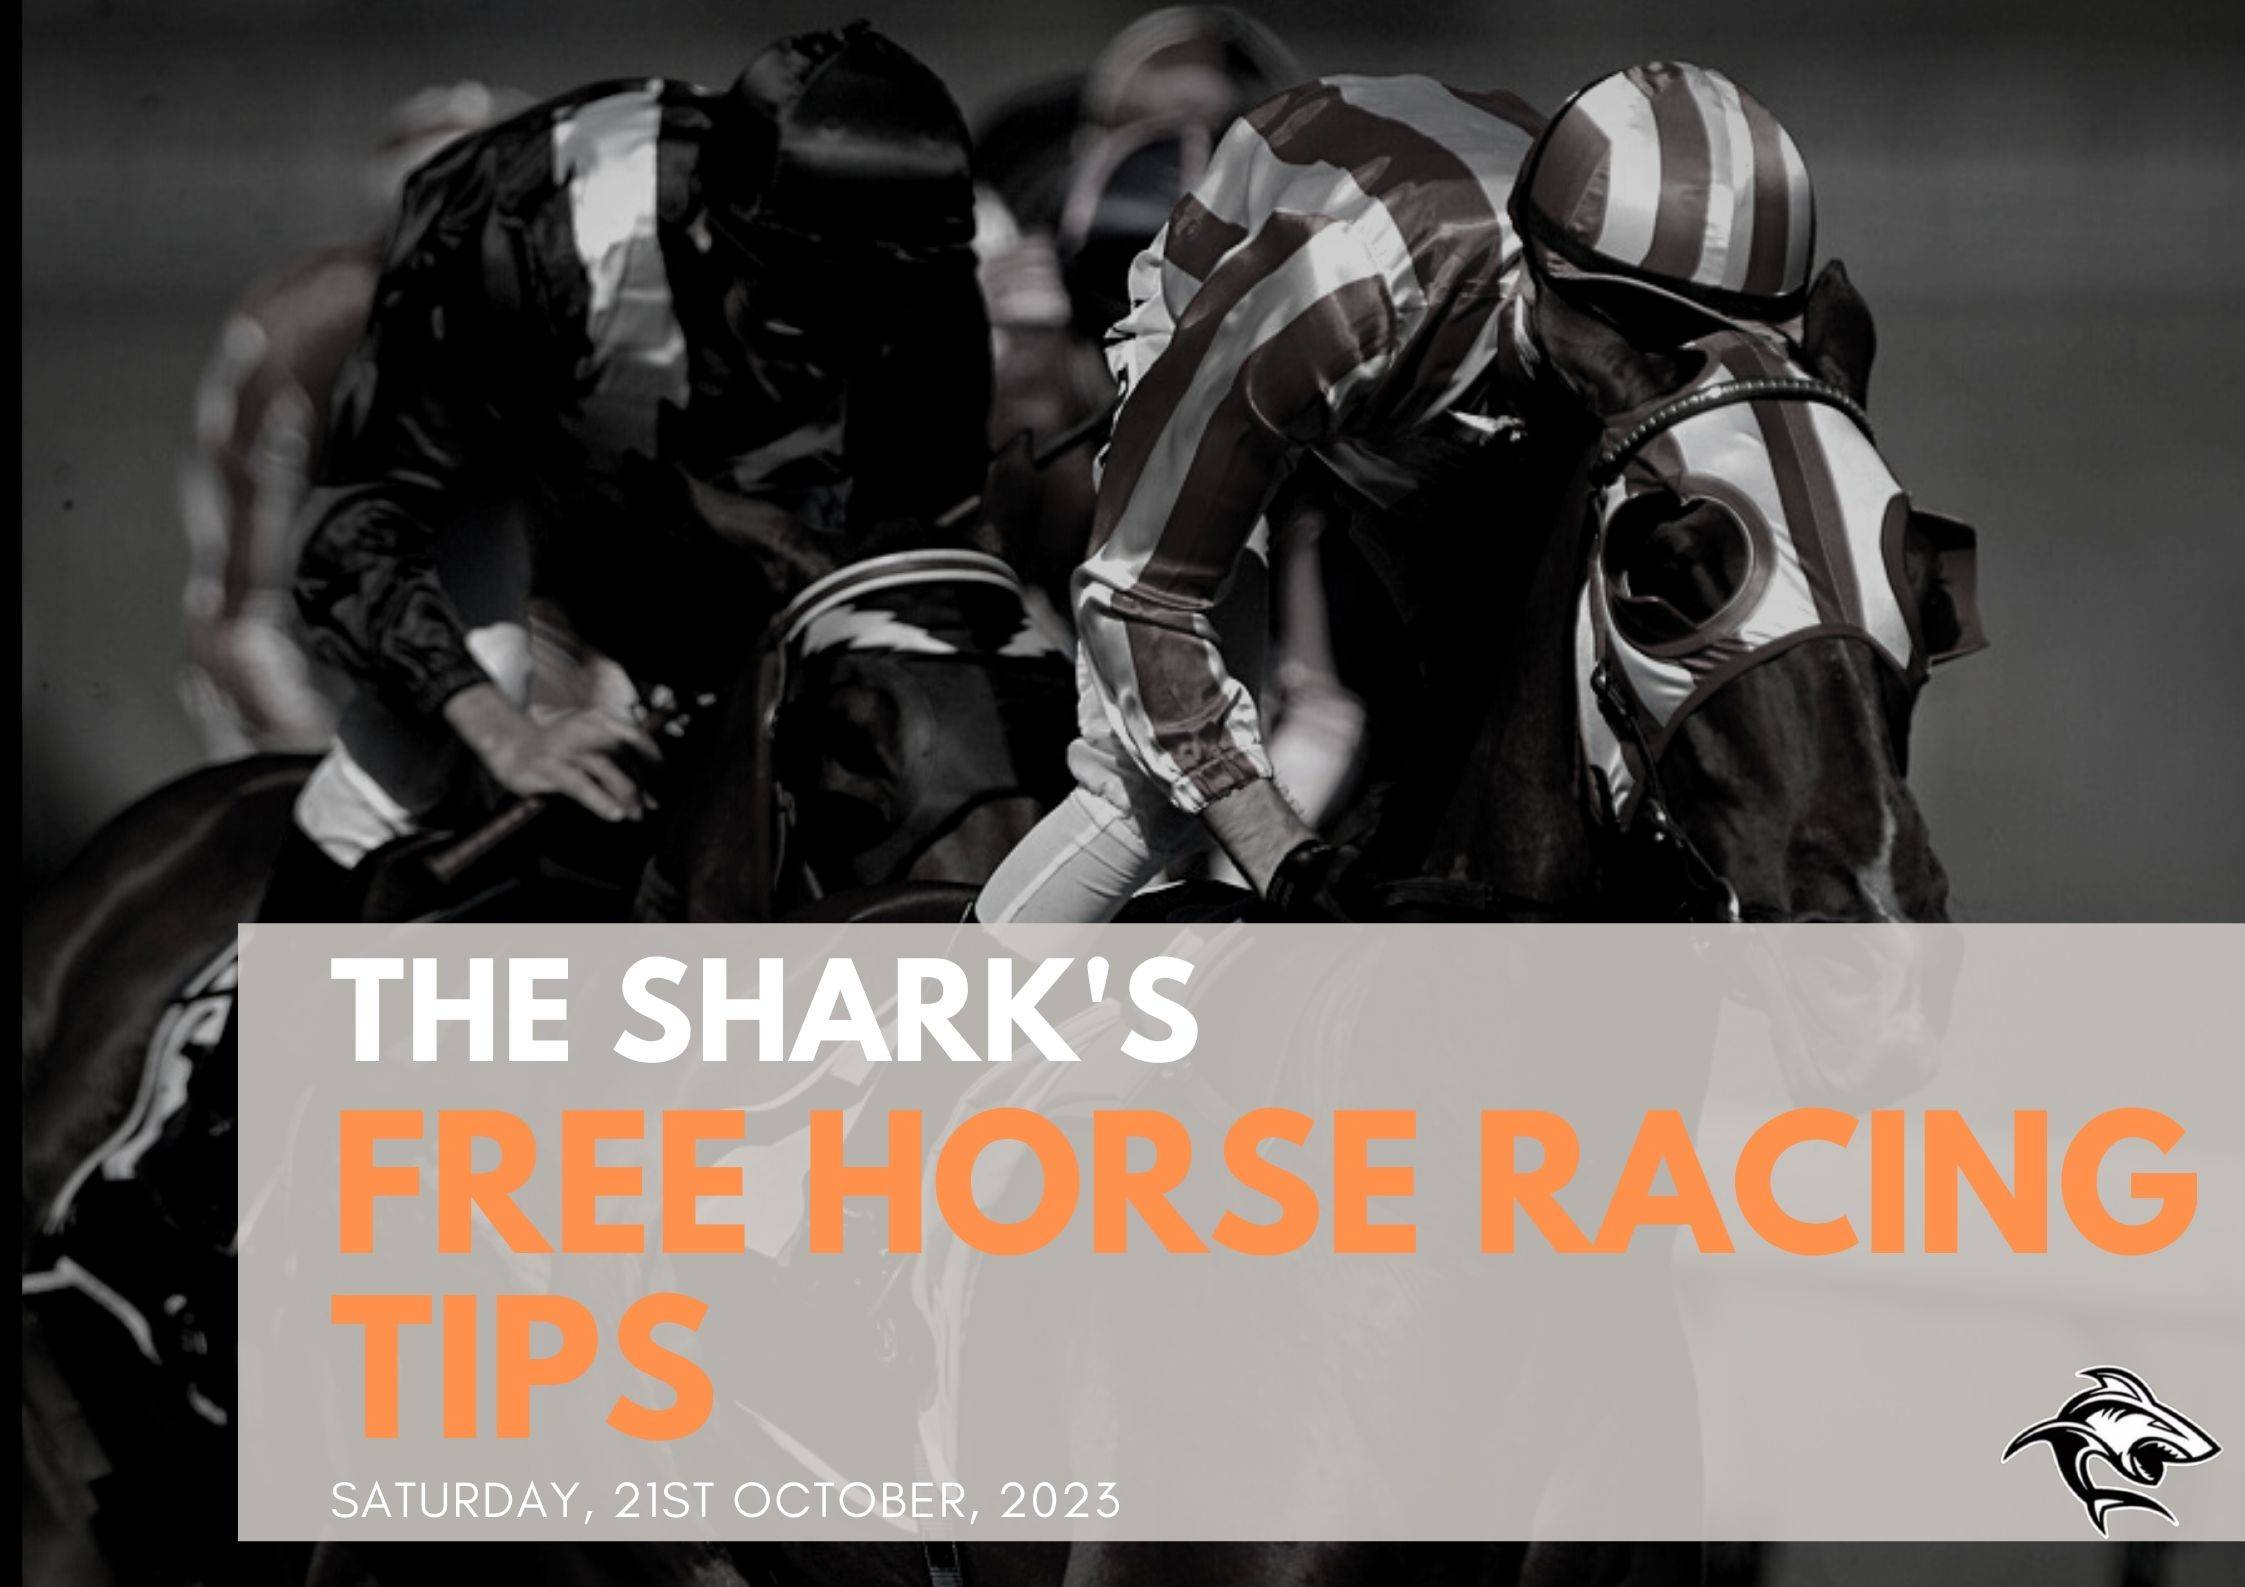 Free Horse Racing Tips - 21st Oct